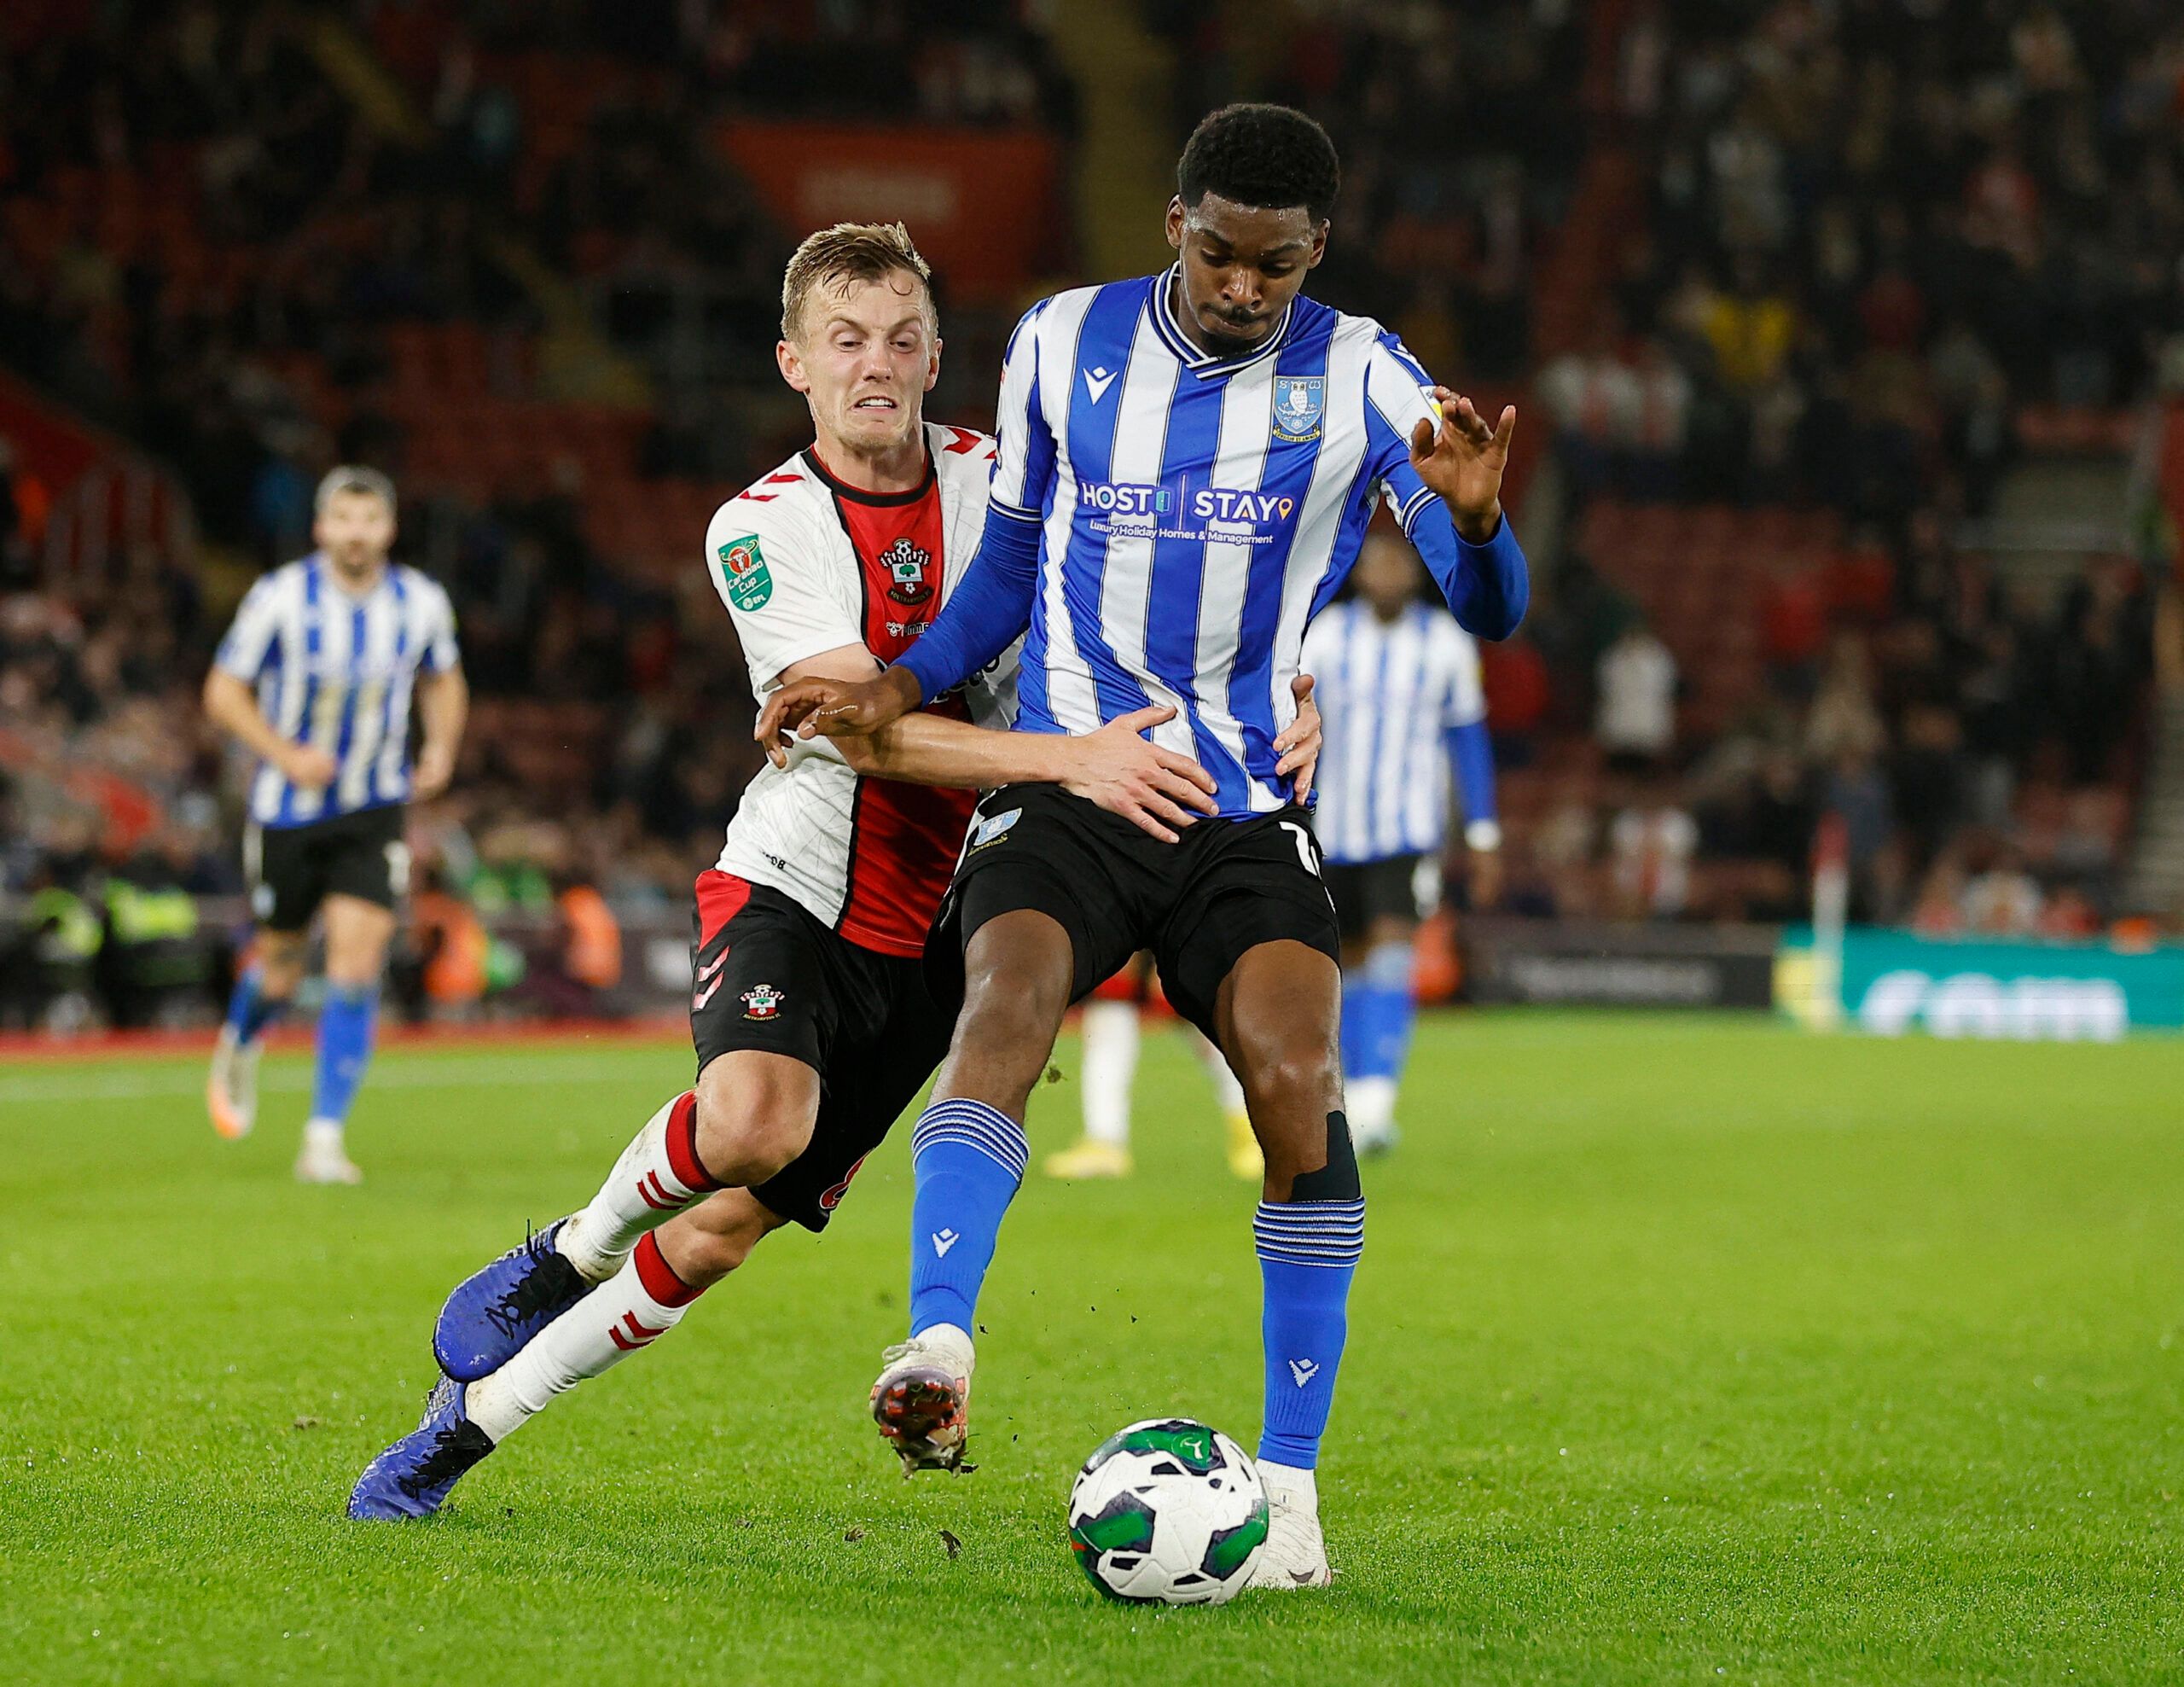 Soccer Football - Carabao Cup Third Round - Southampton v Sheffield Wednesday - St Mary's Stadium, Southampton, Britain - November 9, 2022  Sheffield Wednesday's Tyreeq Bakinson in action with Southampton's James Ward-Prowse REUTERS/Peter Nicholls EDITORIAL USE ONLY. No use with unauthorized audio, video, data, fixture lists, club/league logos or 'live' services. Online in-match use limited to 75 images, no video emulation. No use in betting, games or single club /league/player publications.  Pl